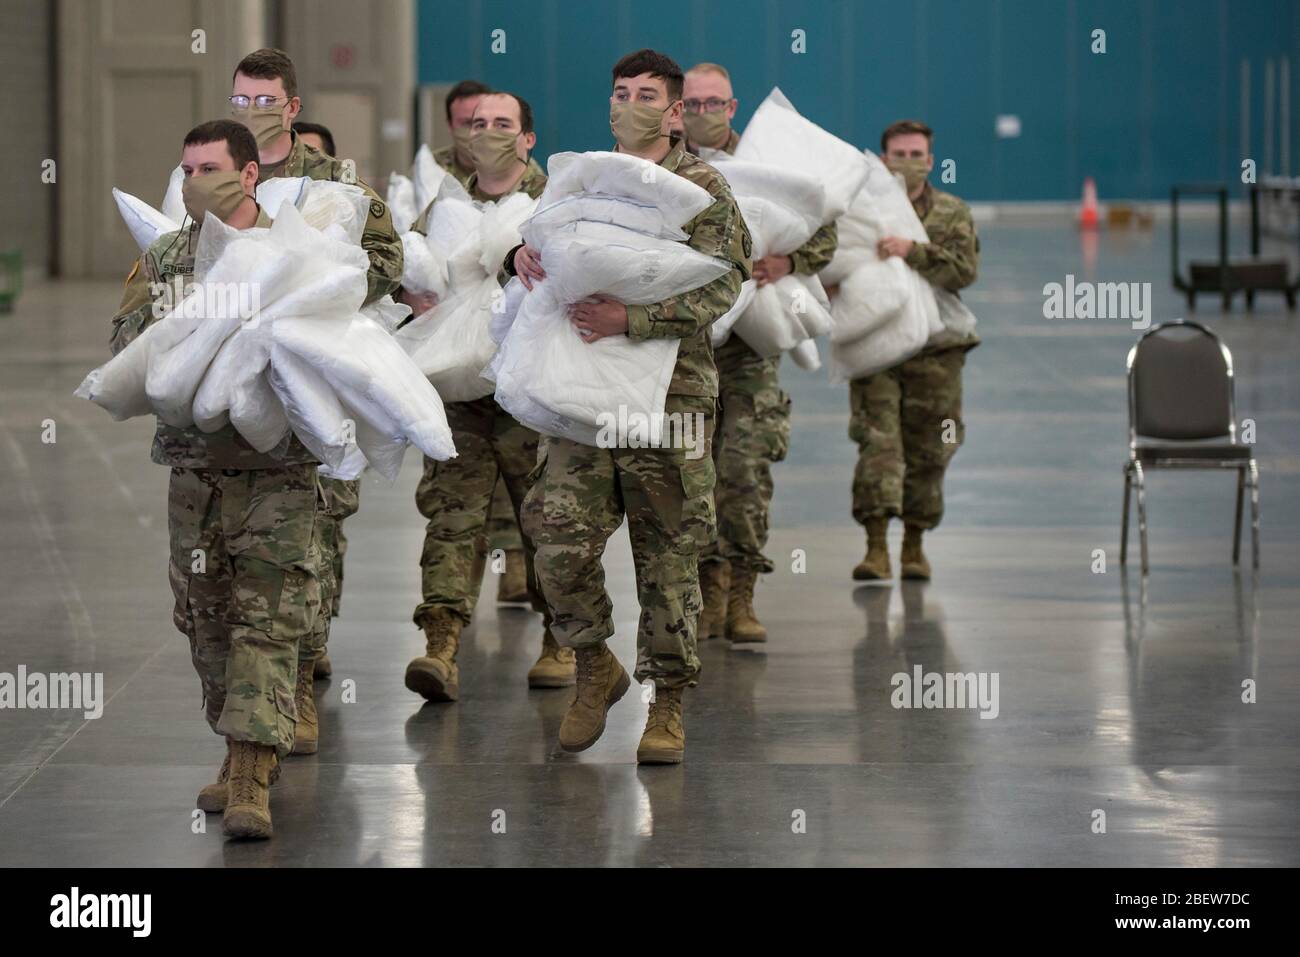 Kentucky Army National Guard soldiers distribute hospital bed pillows for an Alternate Care Facility to treat COVID-19, coronavirus pandemic patients set up at the Kentucky Fair and Exposition Center April 14, 2020 in Louisville, Kentucky. Stock Photo